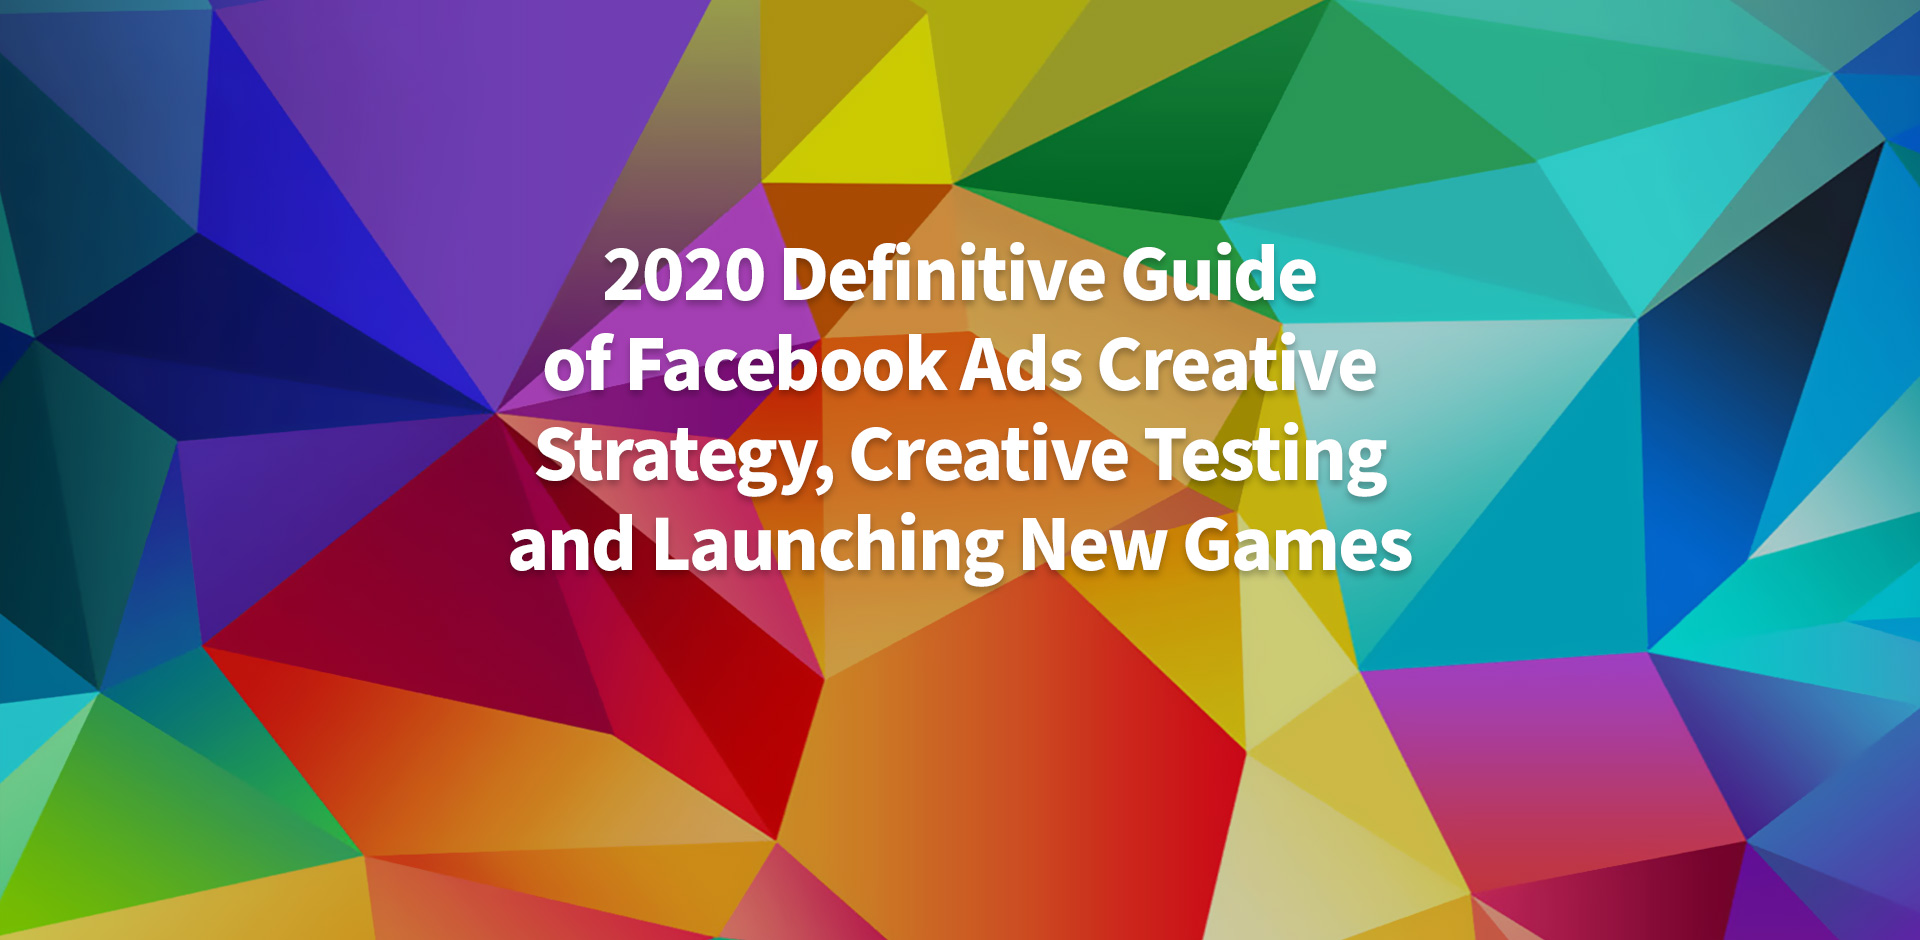 2020 Definitive Guide Of Facebook Ads Creative Strategy, Creative Testing and Launching New Games